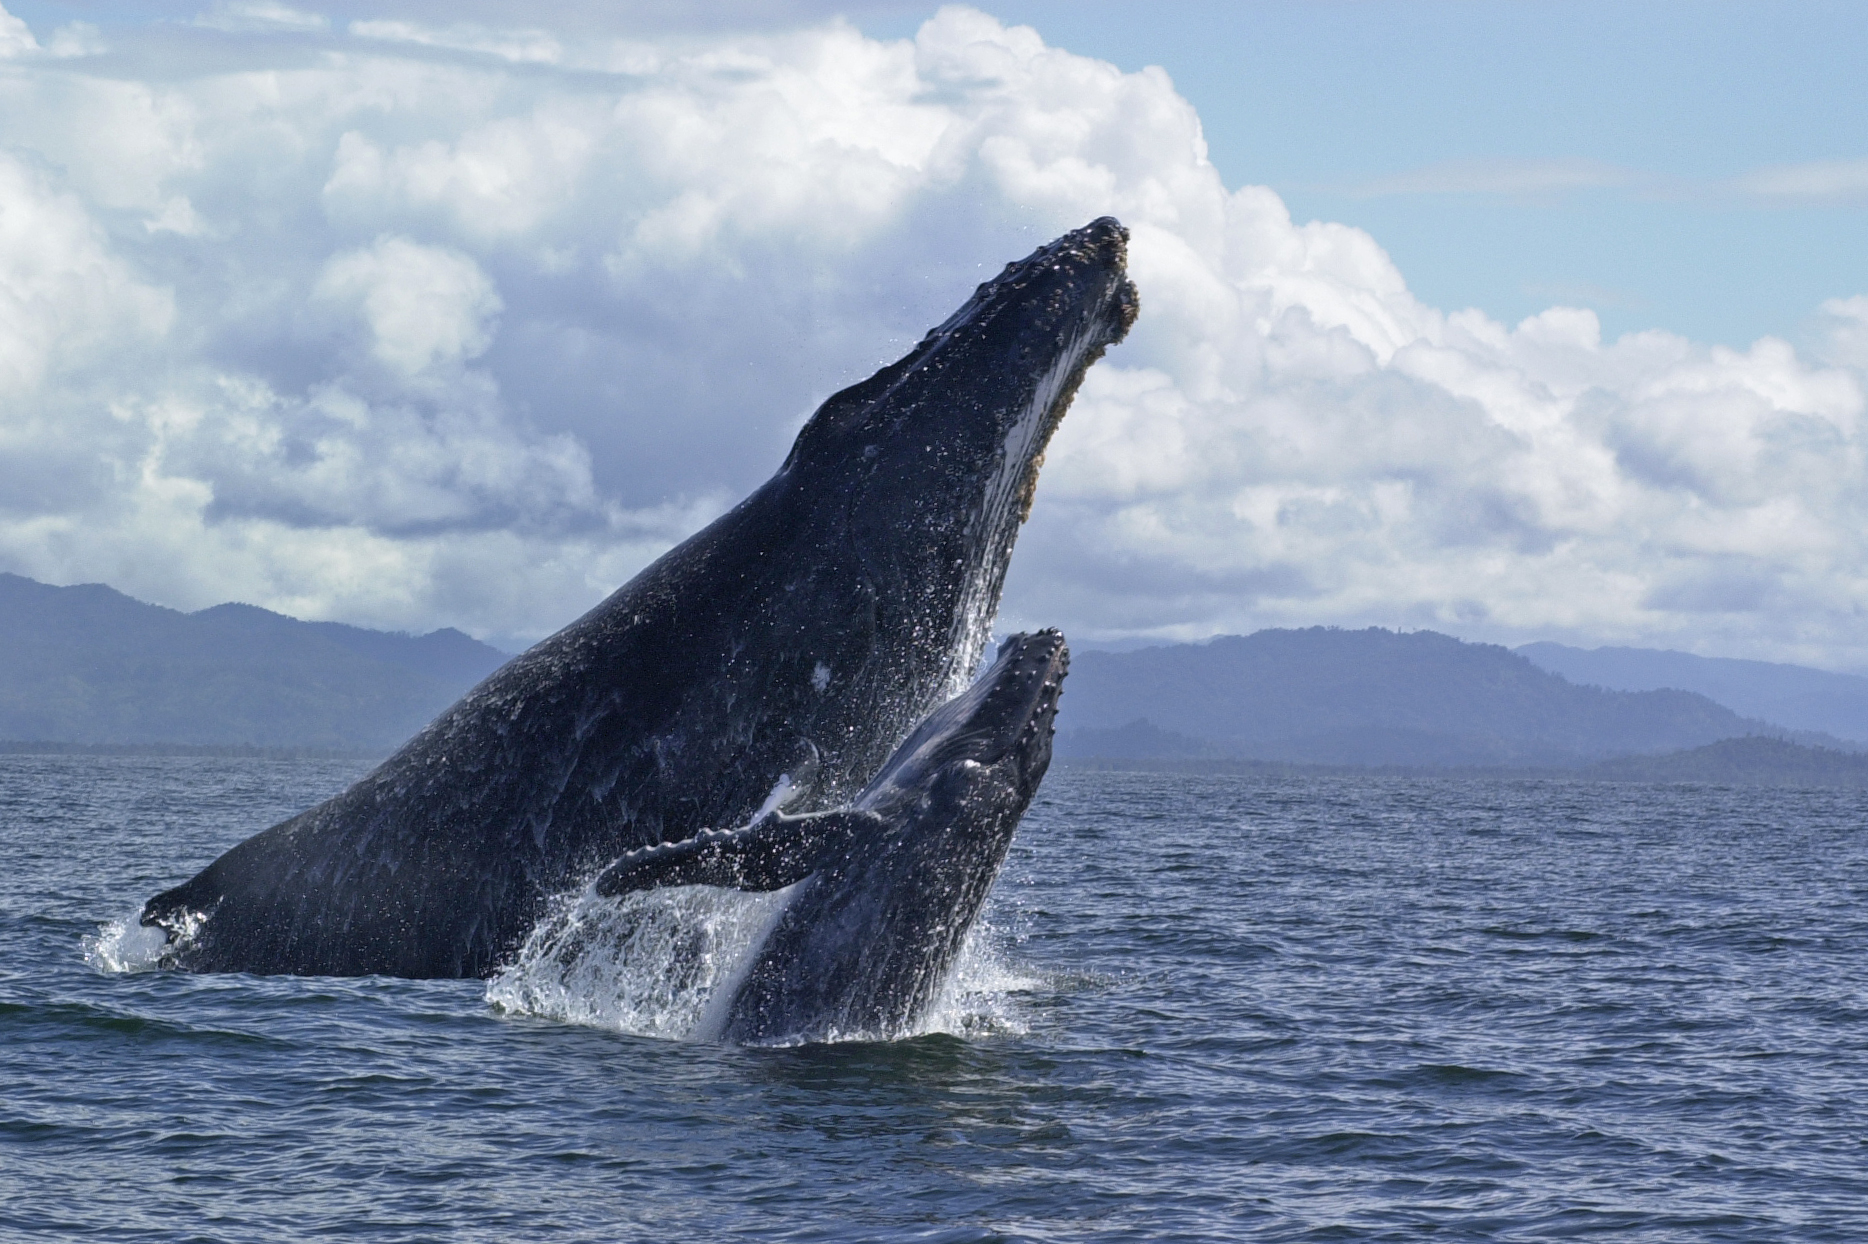 One Giant Leap – Humpback Whales